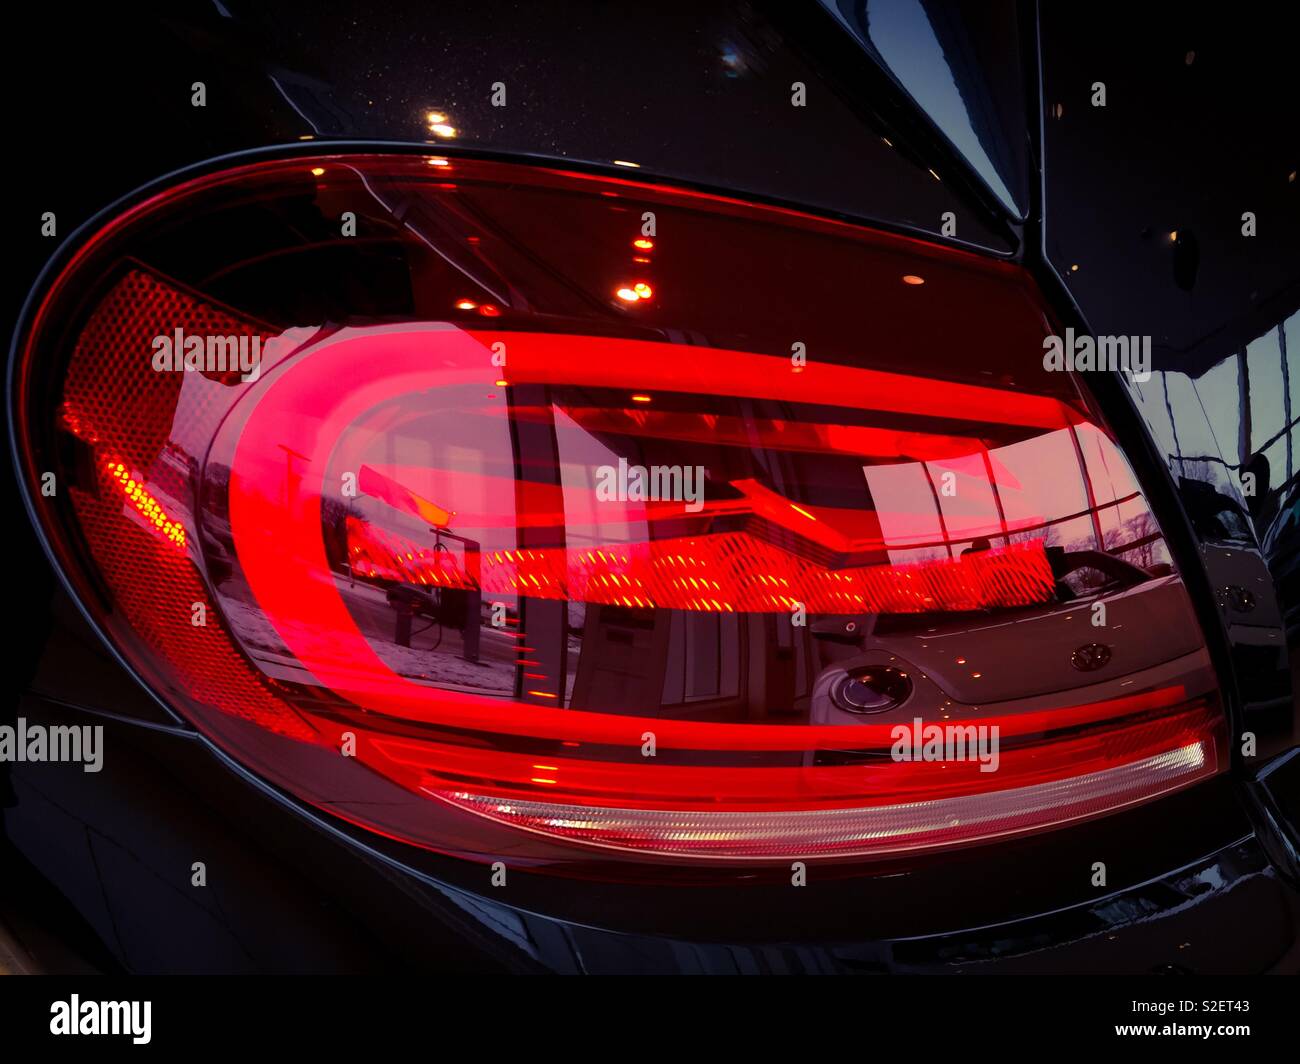 Stylish tail light of an automobile on show reflects the new car showroom in shimmering shades of red. Concepts: interior, elegance, reflection, modernism. Design elegance. Automotive. Stock Photo